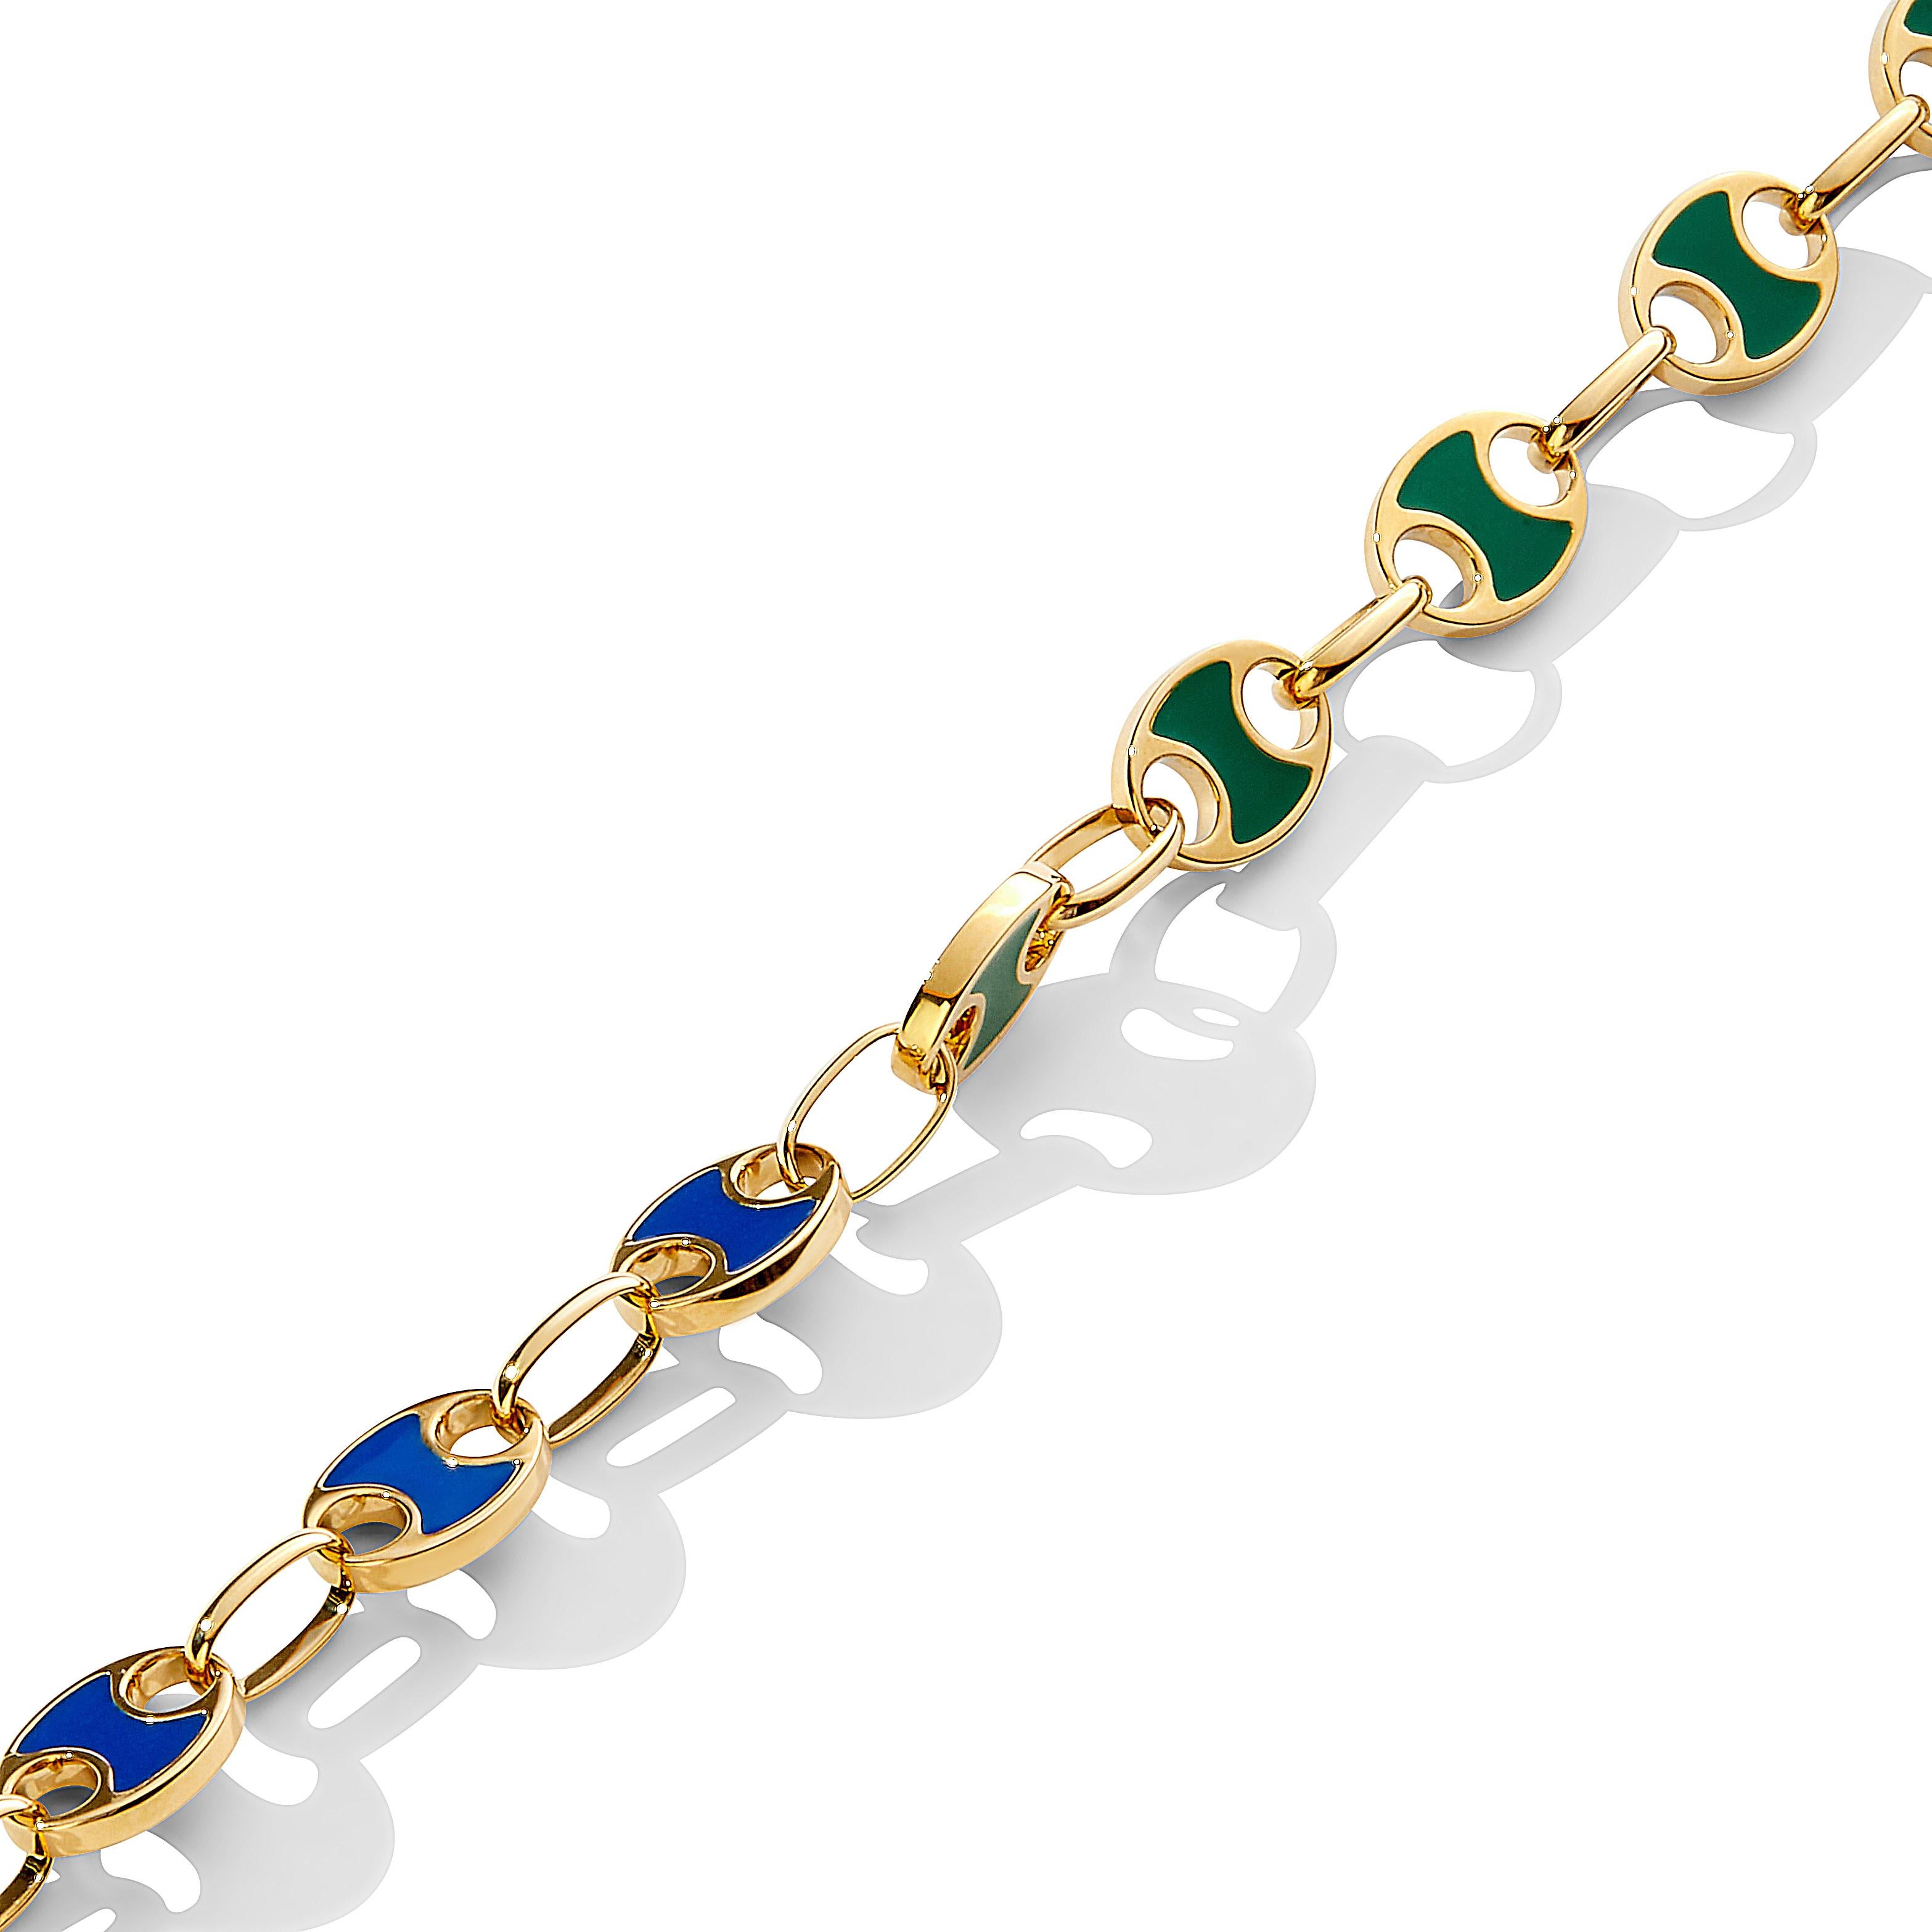 Created in 18 karat yellow gold
Length 8 inches
Emerald green and lapis blue enamel 
18kyg lobster lock with sizing rings

Exquisitely crafted in 18 karat yellow gold, this 8-inch bracelet shimmers with emerald green and lapis blue enamel, and its